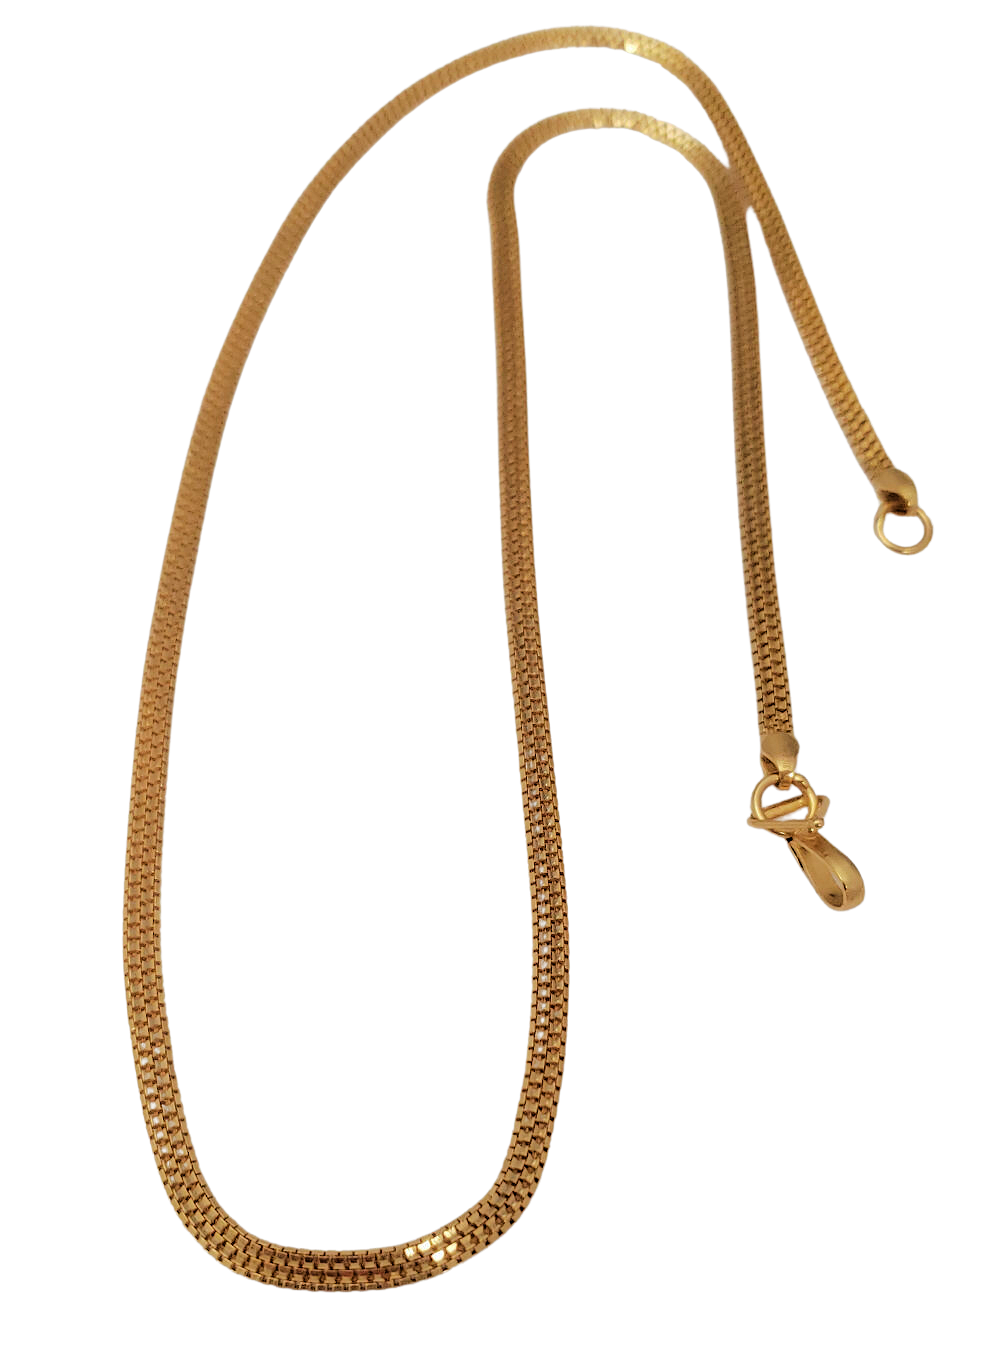 23k Yellow Gold 3mm Mesh Chain Necklace 20